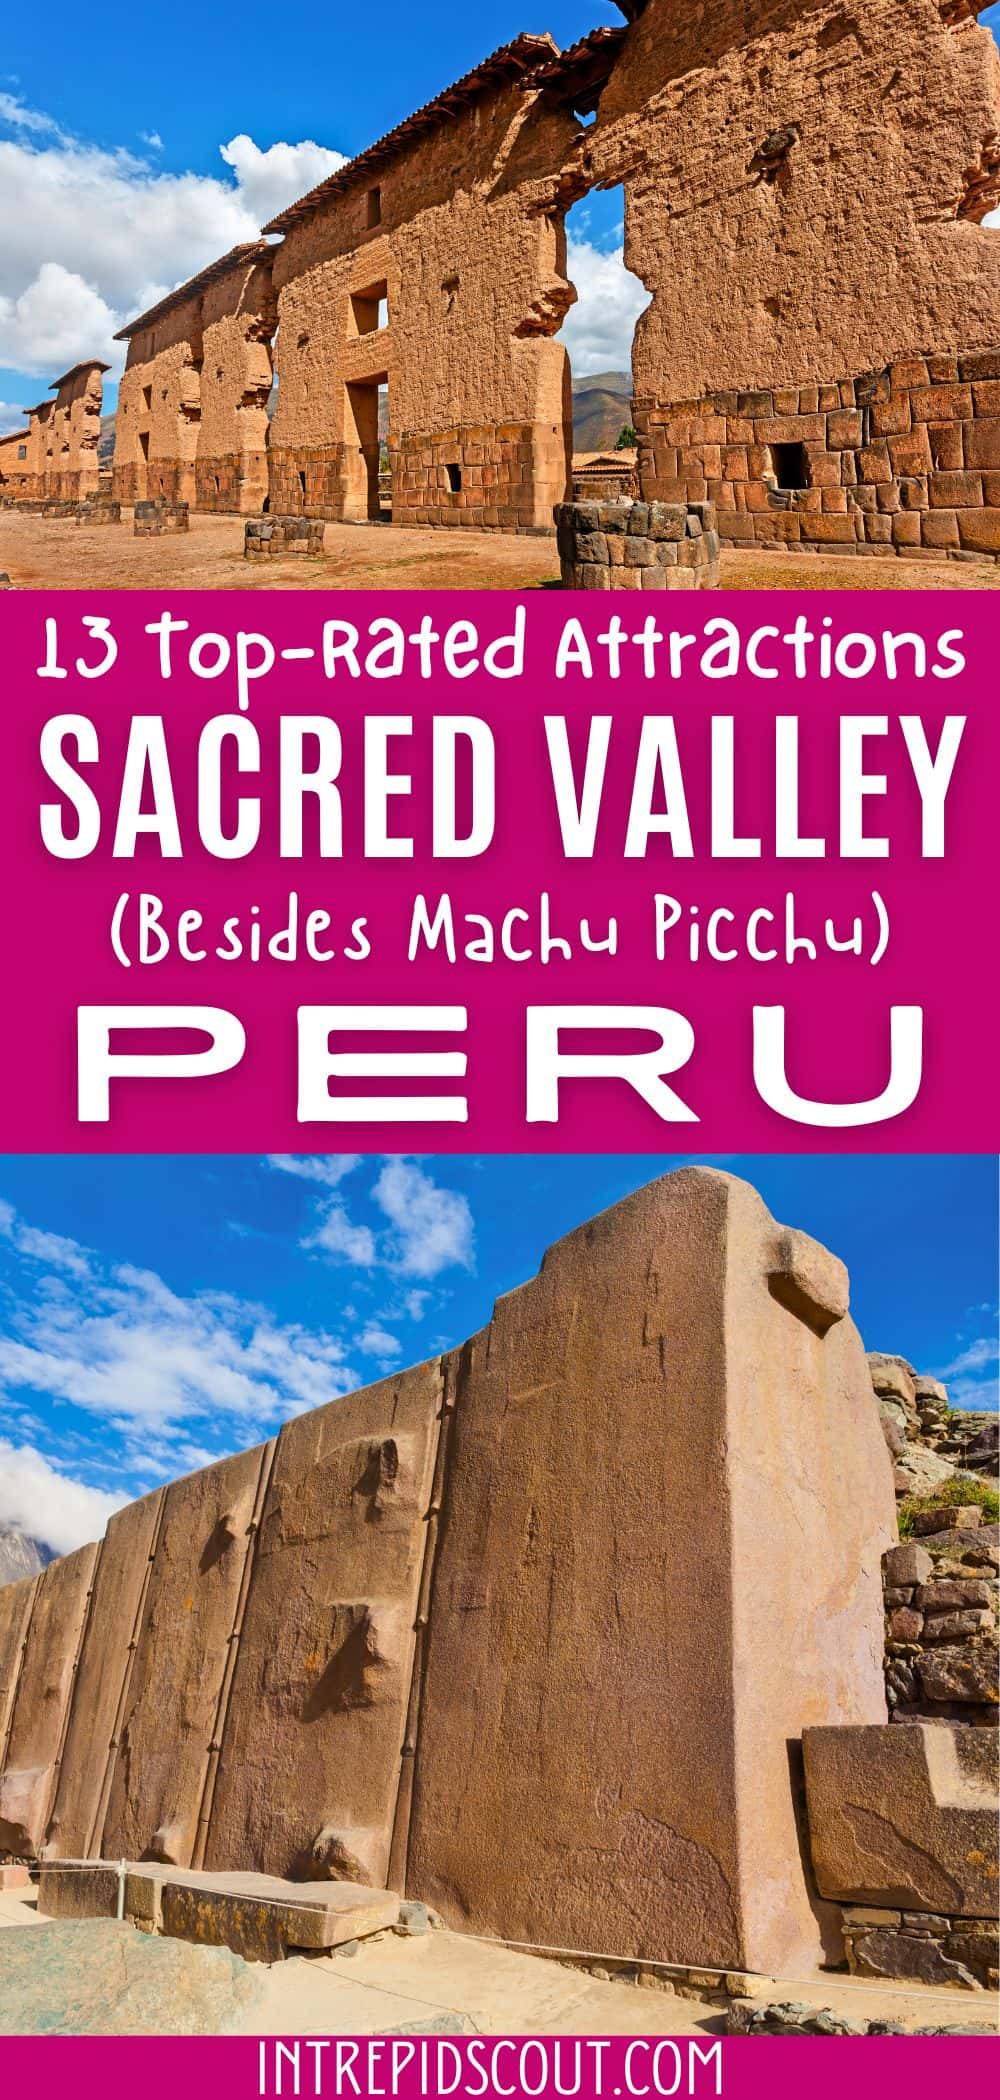 Attractions in the Sacred Valley